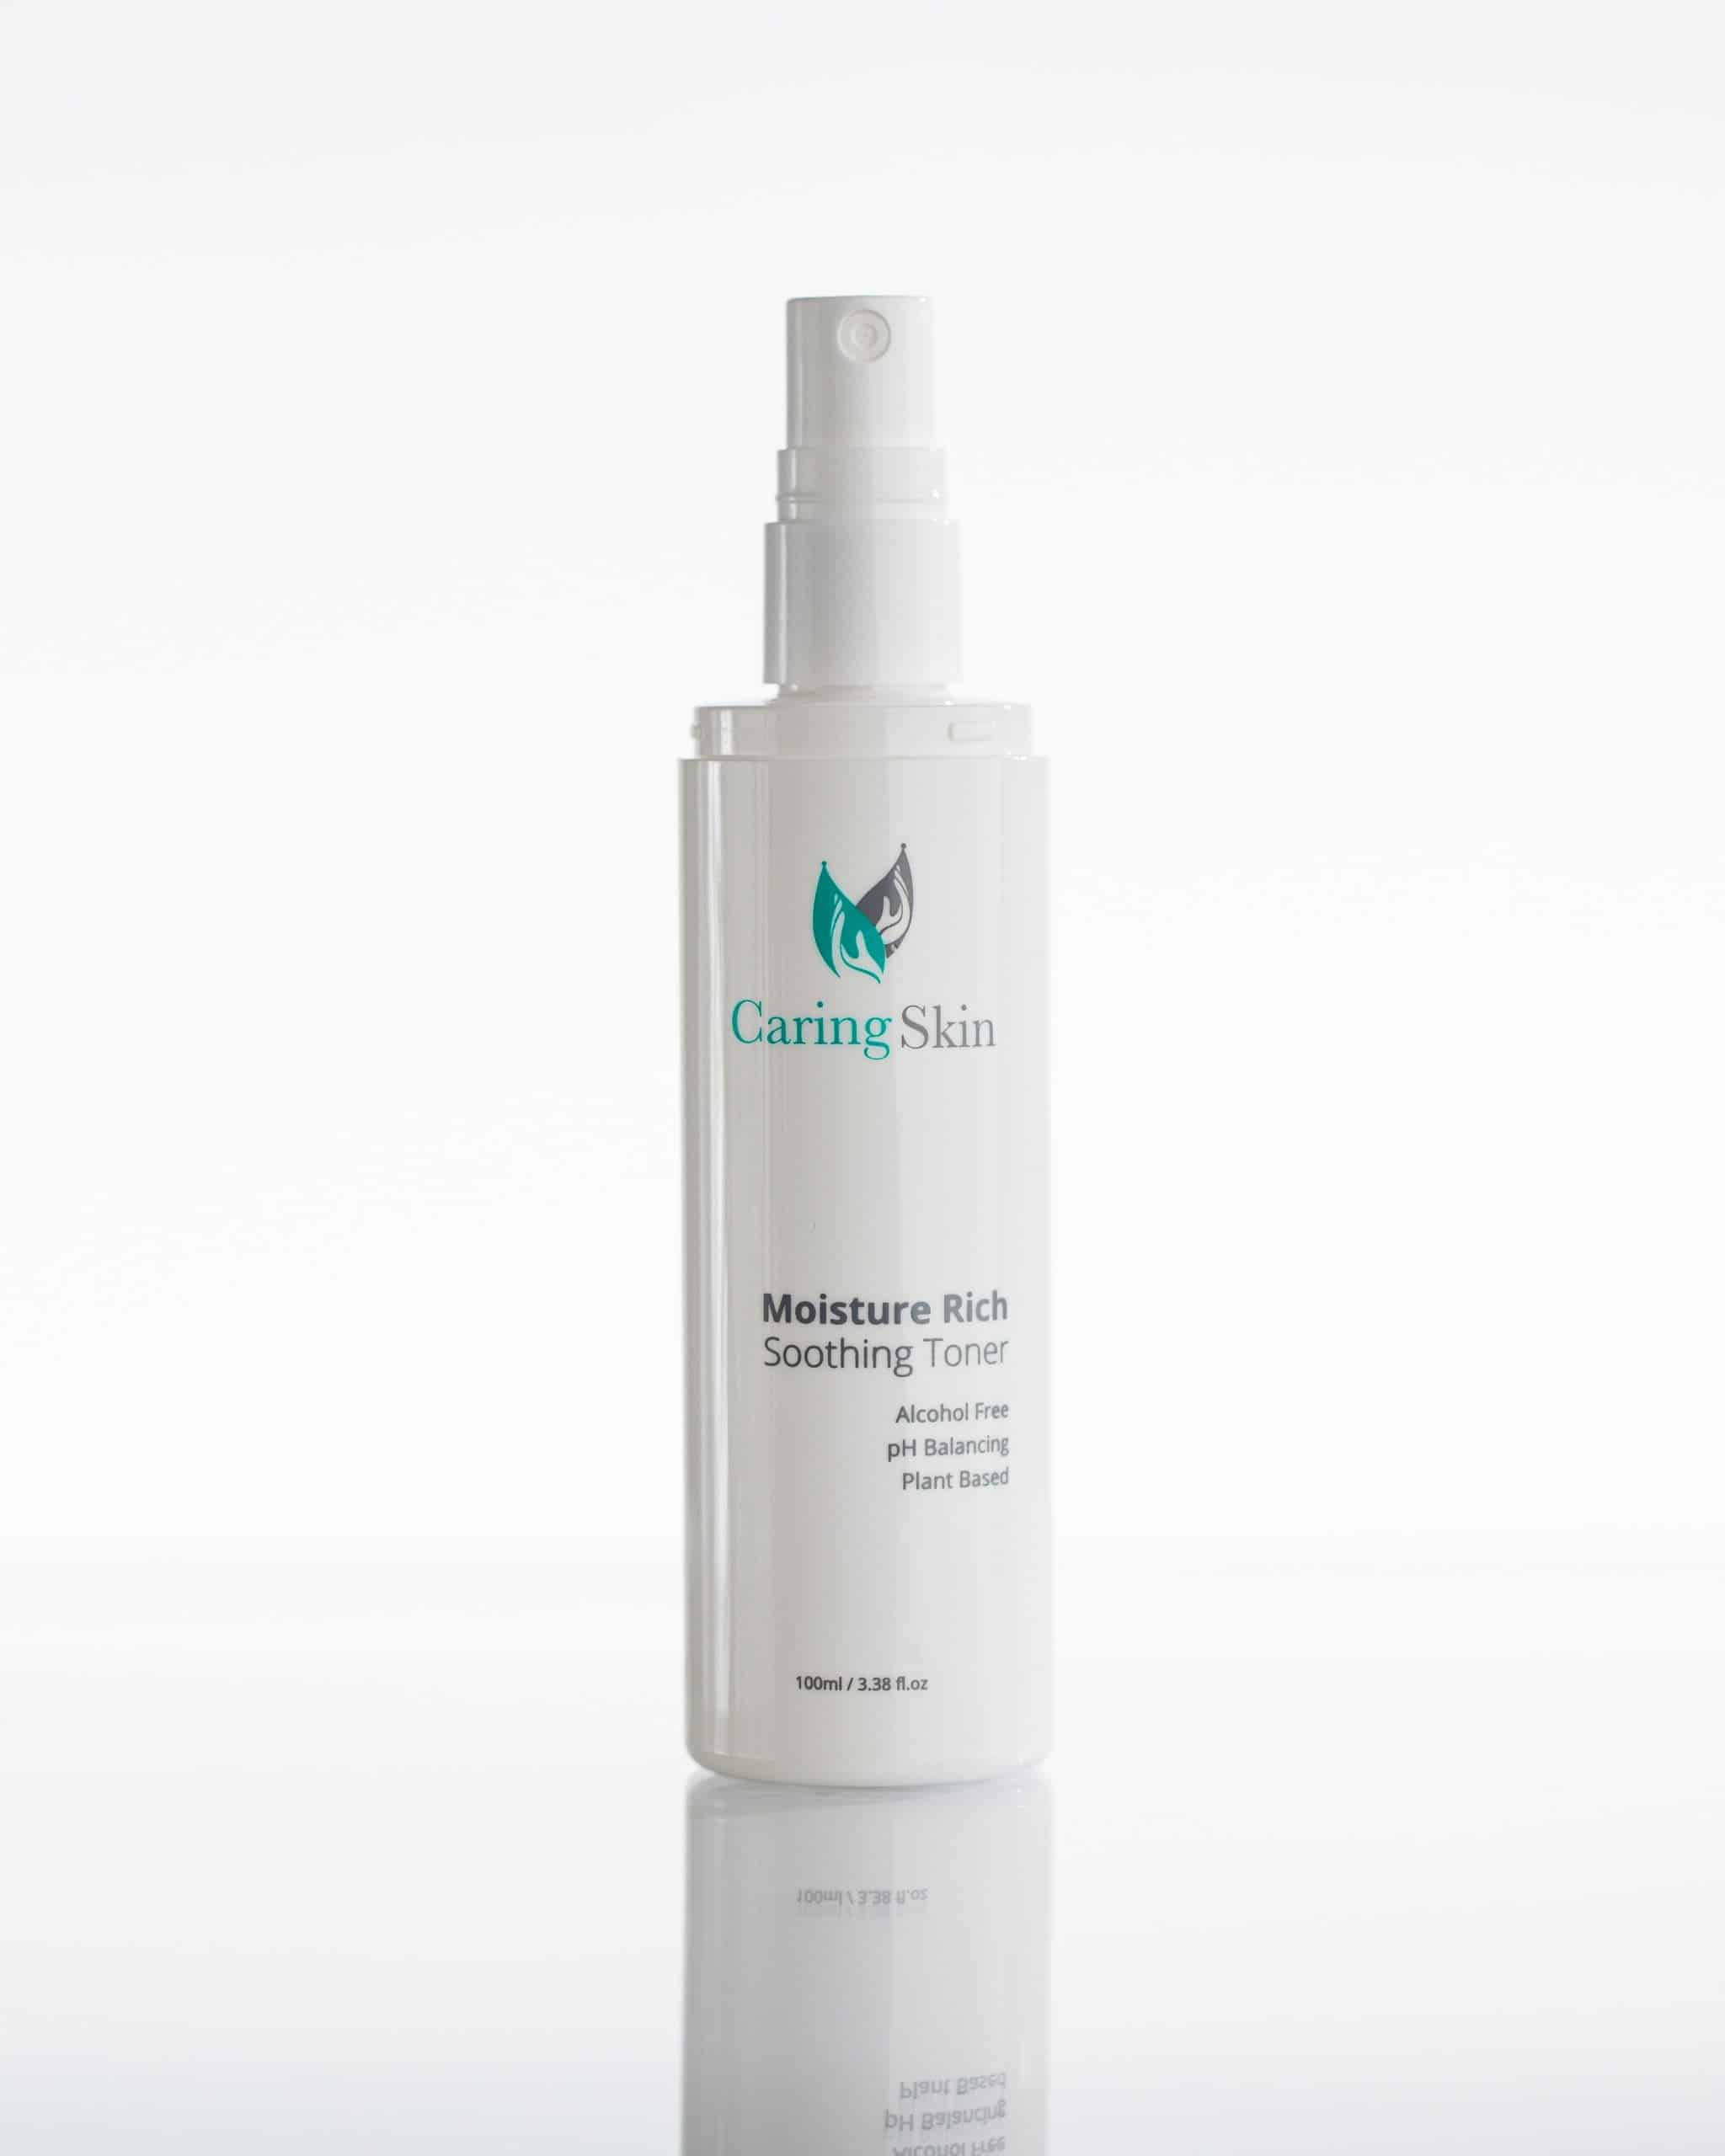 Moisture Rich Soothing Toner